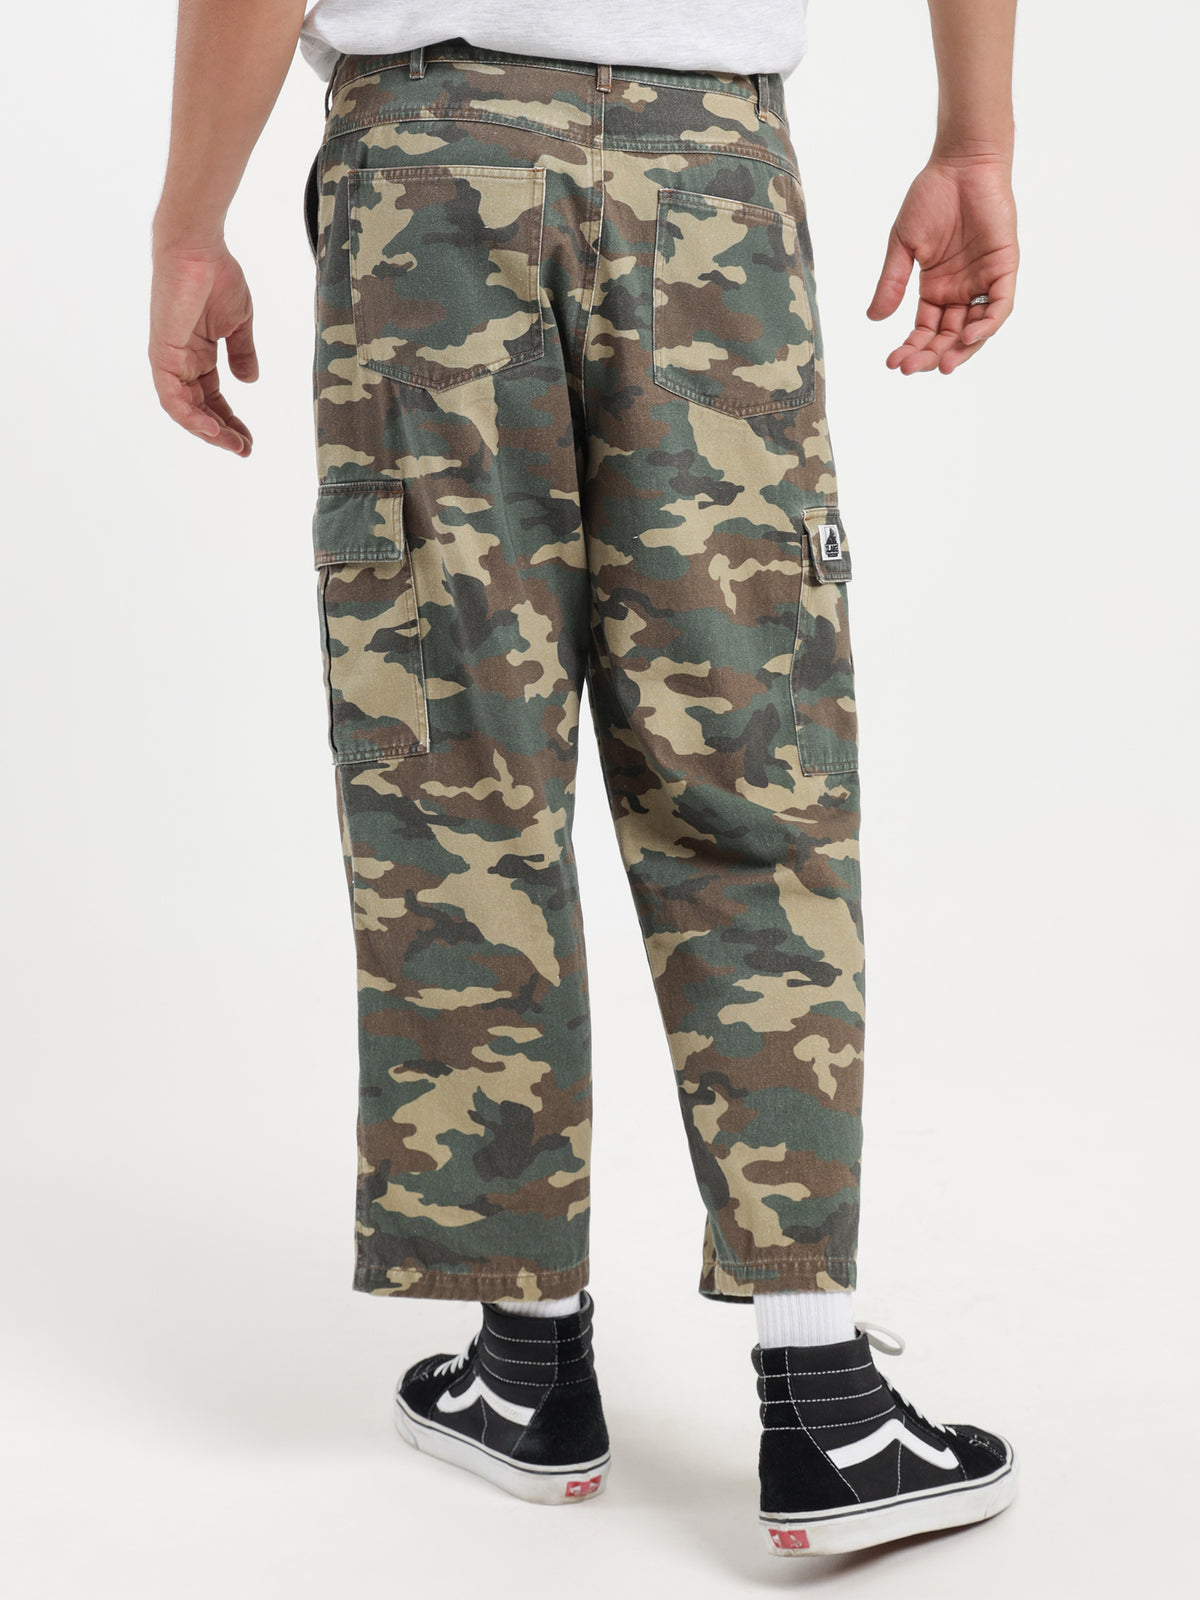 Camo 91 Cargo Pants in Camouflage